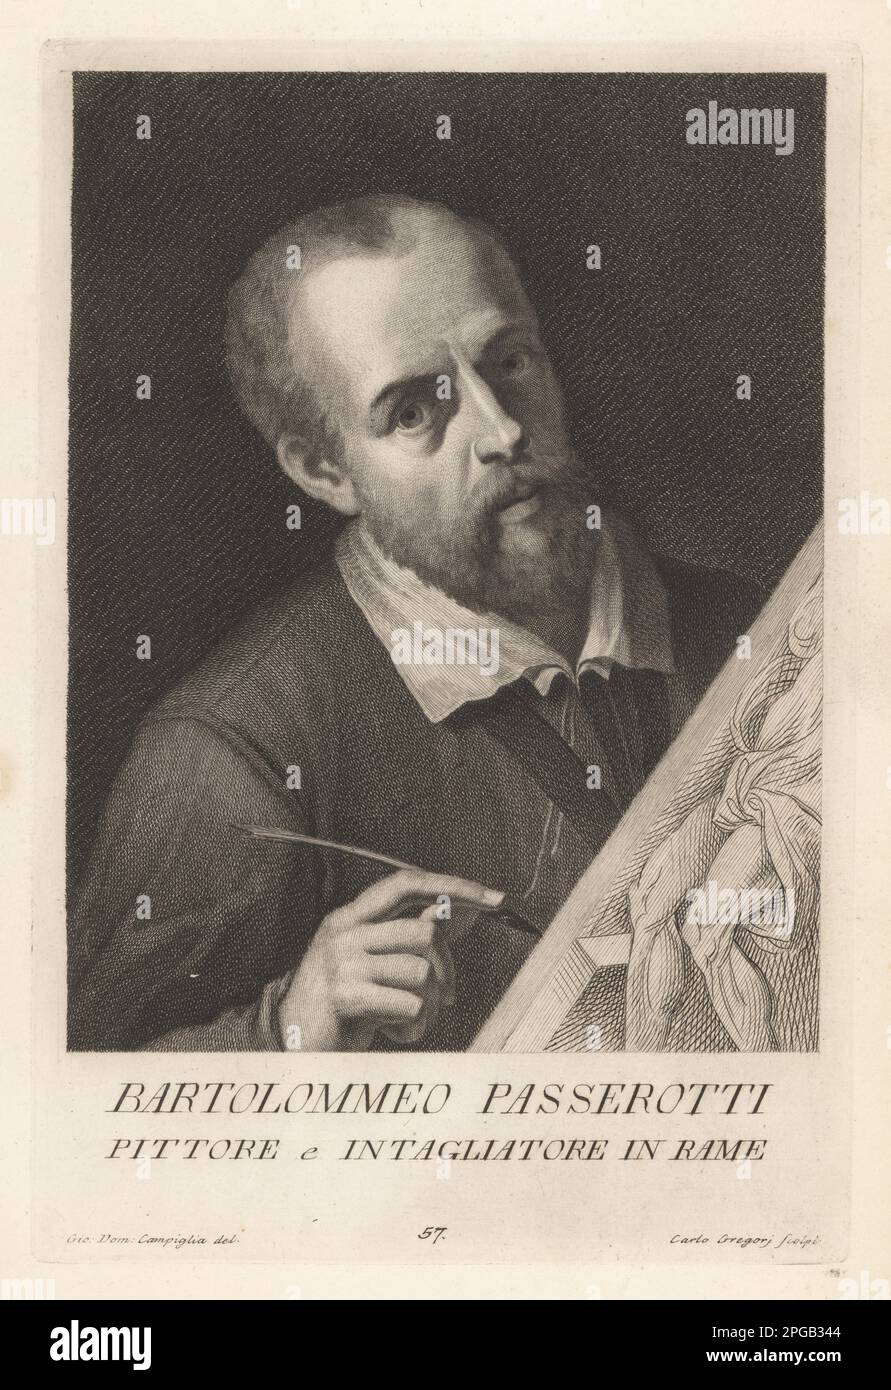 Bartolomeo Passarotti, Italian Mannerist painter who worked mainly in Bologna, 1529–1592. With brush before a painting on an easel. Bartolomeo Passerotti, Pittore e Intagliatore in rame. Copperplate engraving by  after Giovanni Domenico Campiglia after a self portrait by the artist from Francesco Moucke's Museo Florentino (Museum Florentinum), Serie di Ritratti de Pittori (Series of Portraits of Painters) stamperia Mouckiana, Florence, 1752-62. Stock Photo